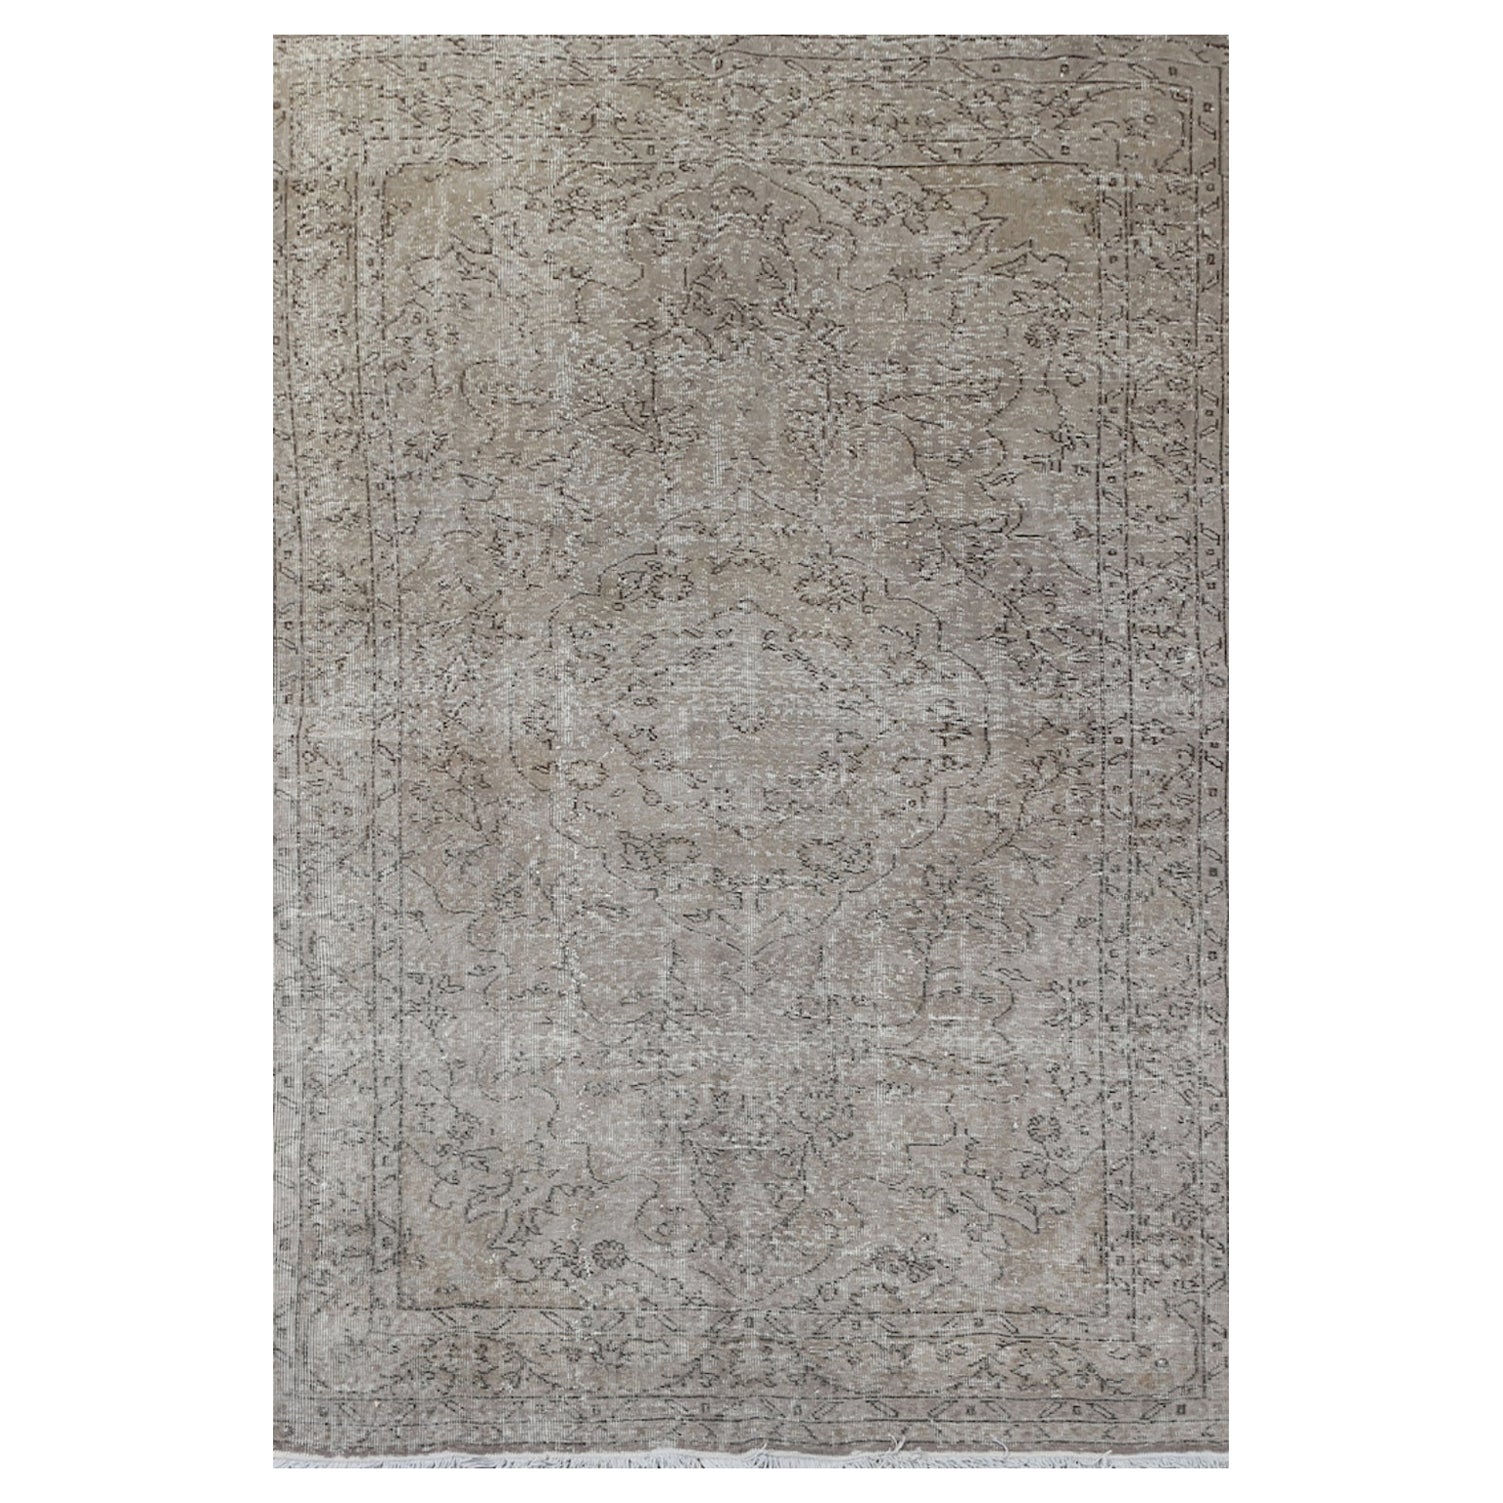 5x9.3 Ft Handmade Vintage Garden-Themed Turkish Wool Rug in Light Taupe Gray For Sale